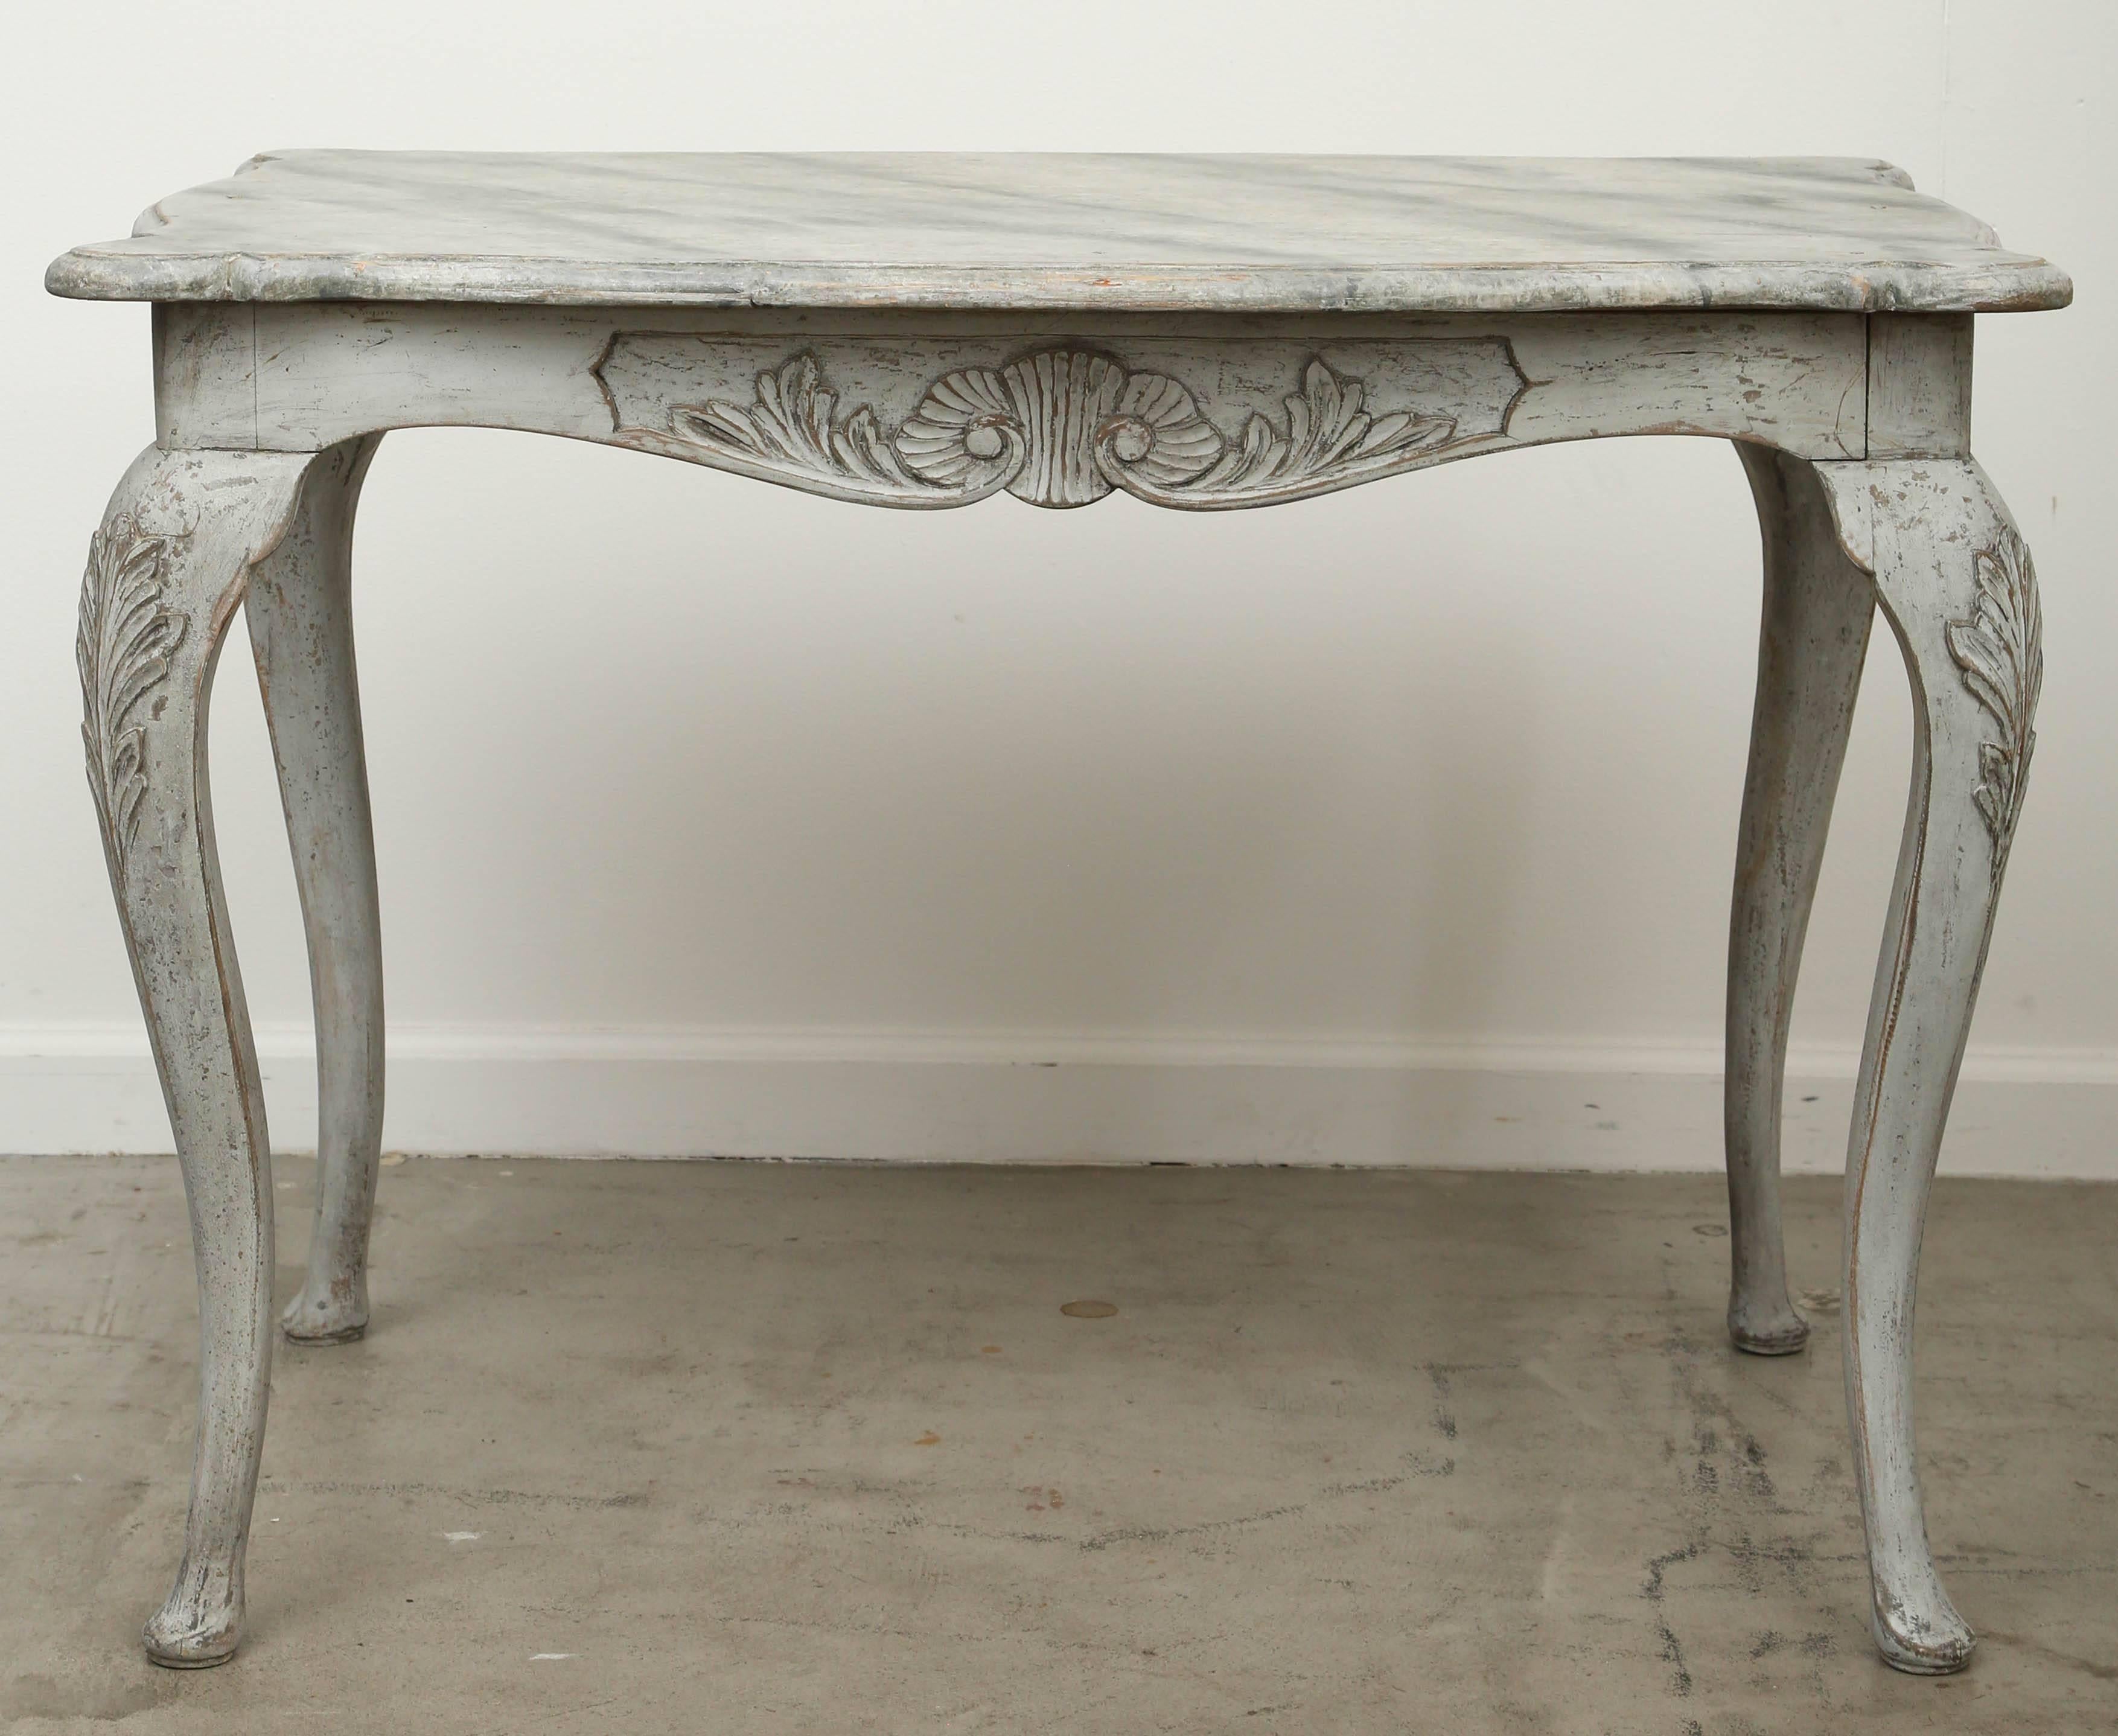 Pine Antique Swedish Rococo Carved Large Painted Table Faux Marble Top, 19th Century